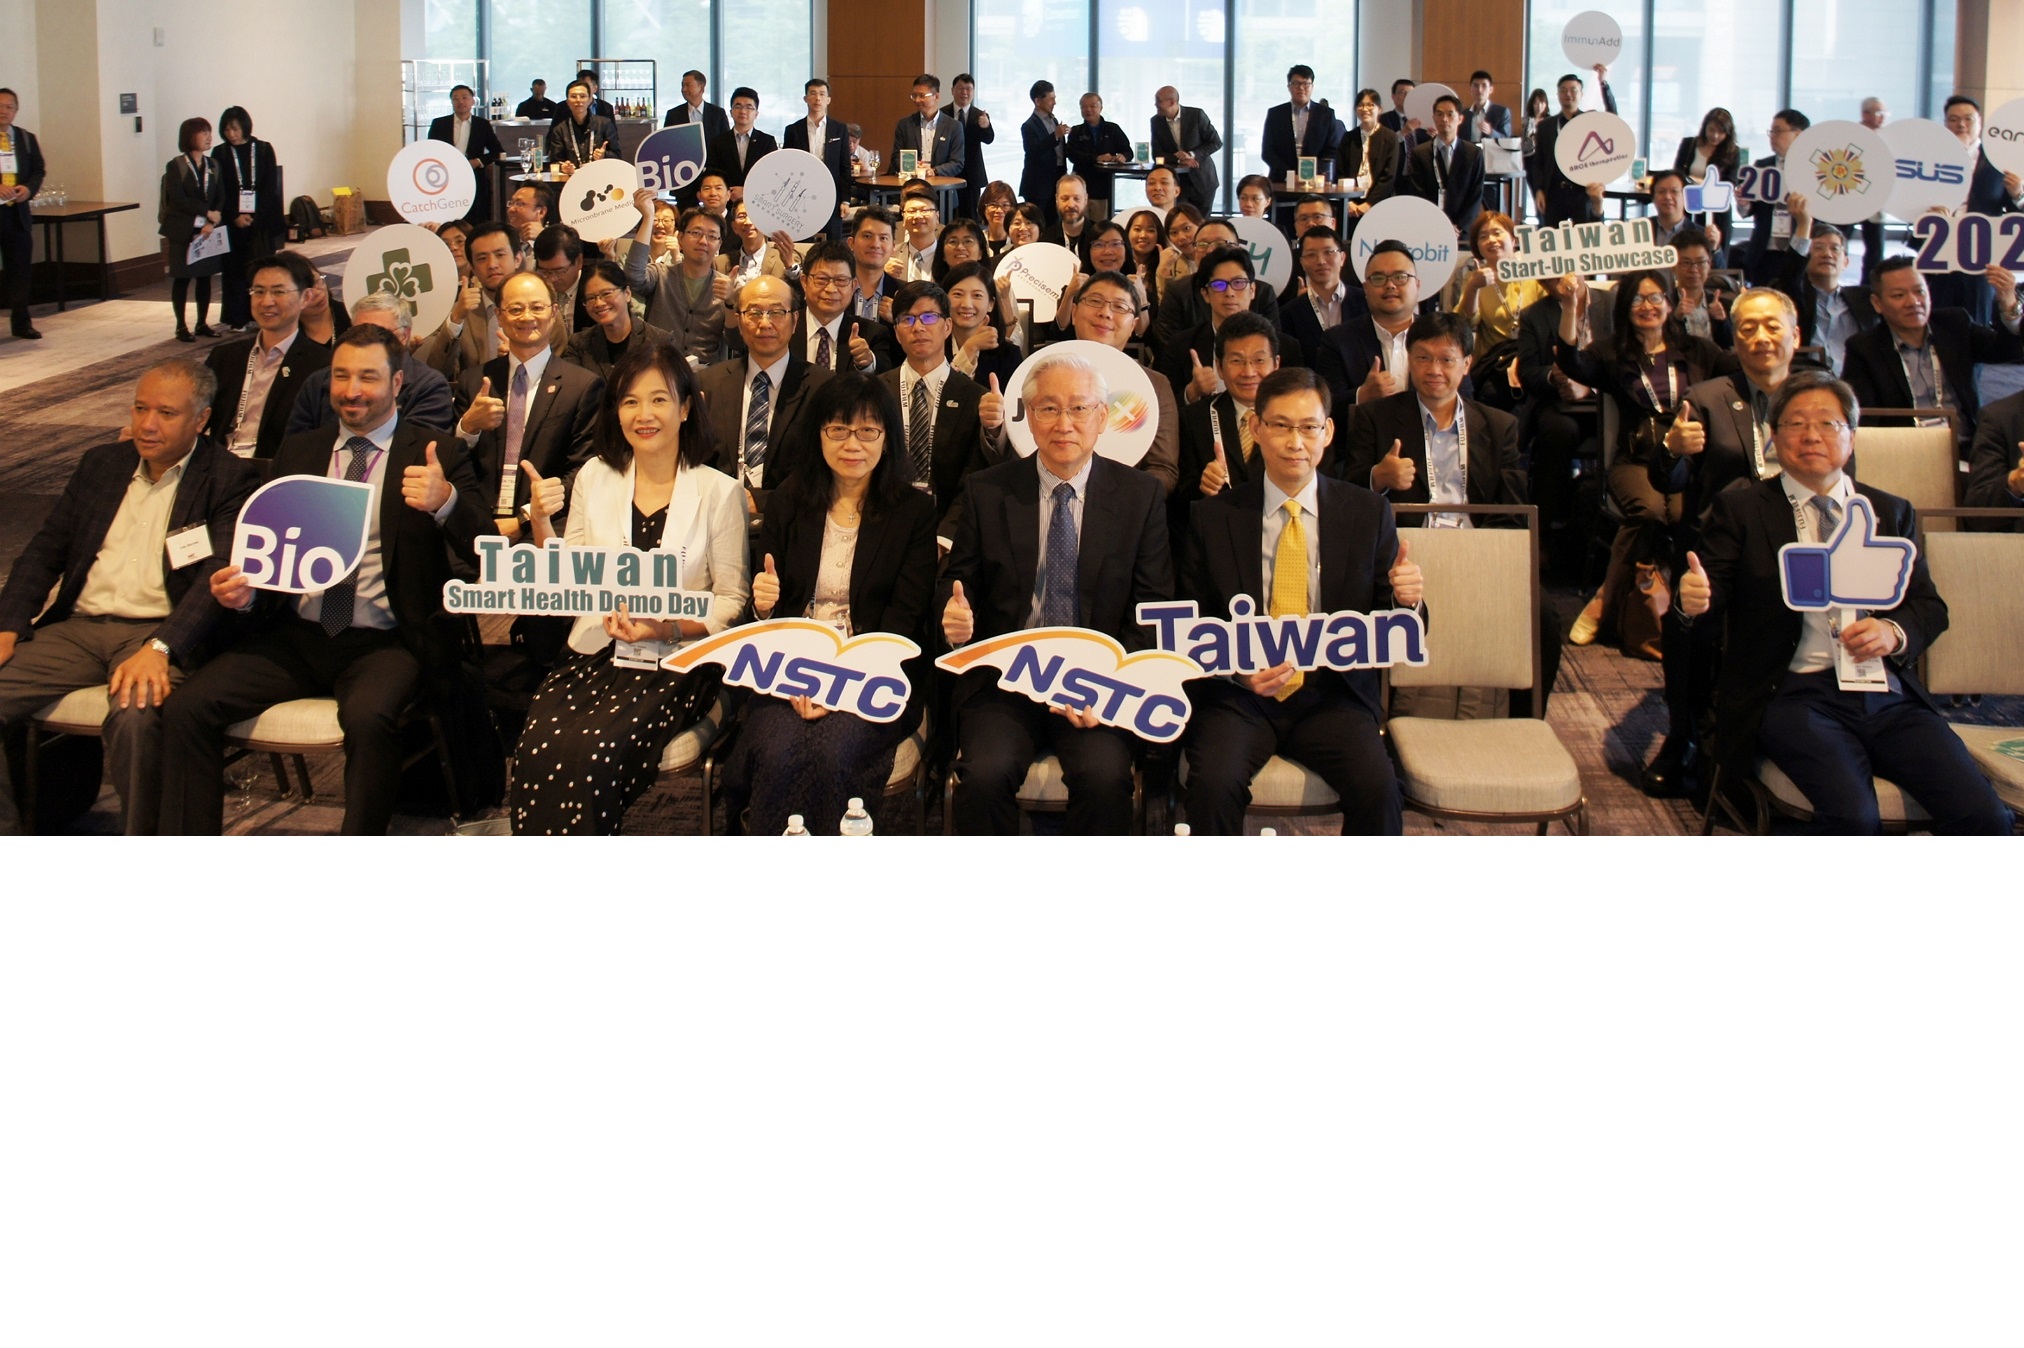 NSTC Joins Forces with Taiwan Biomedical Start-ups to Rise to the World Stage, Showcasing Innovations at US BIO’s Demo Day